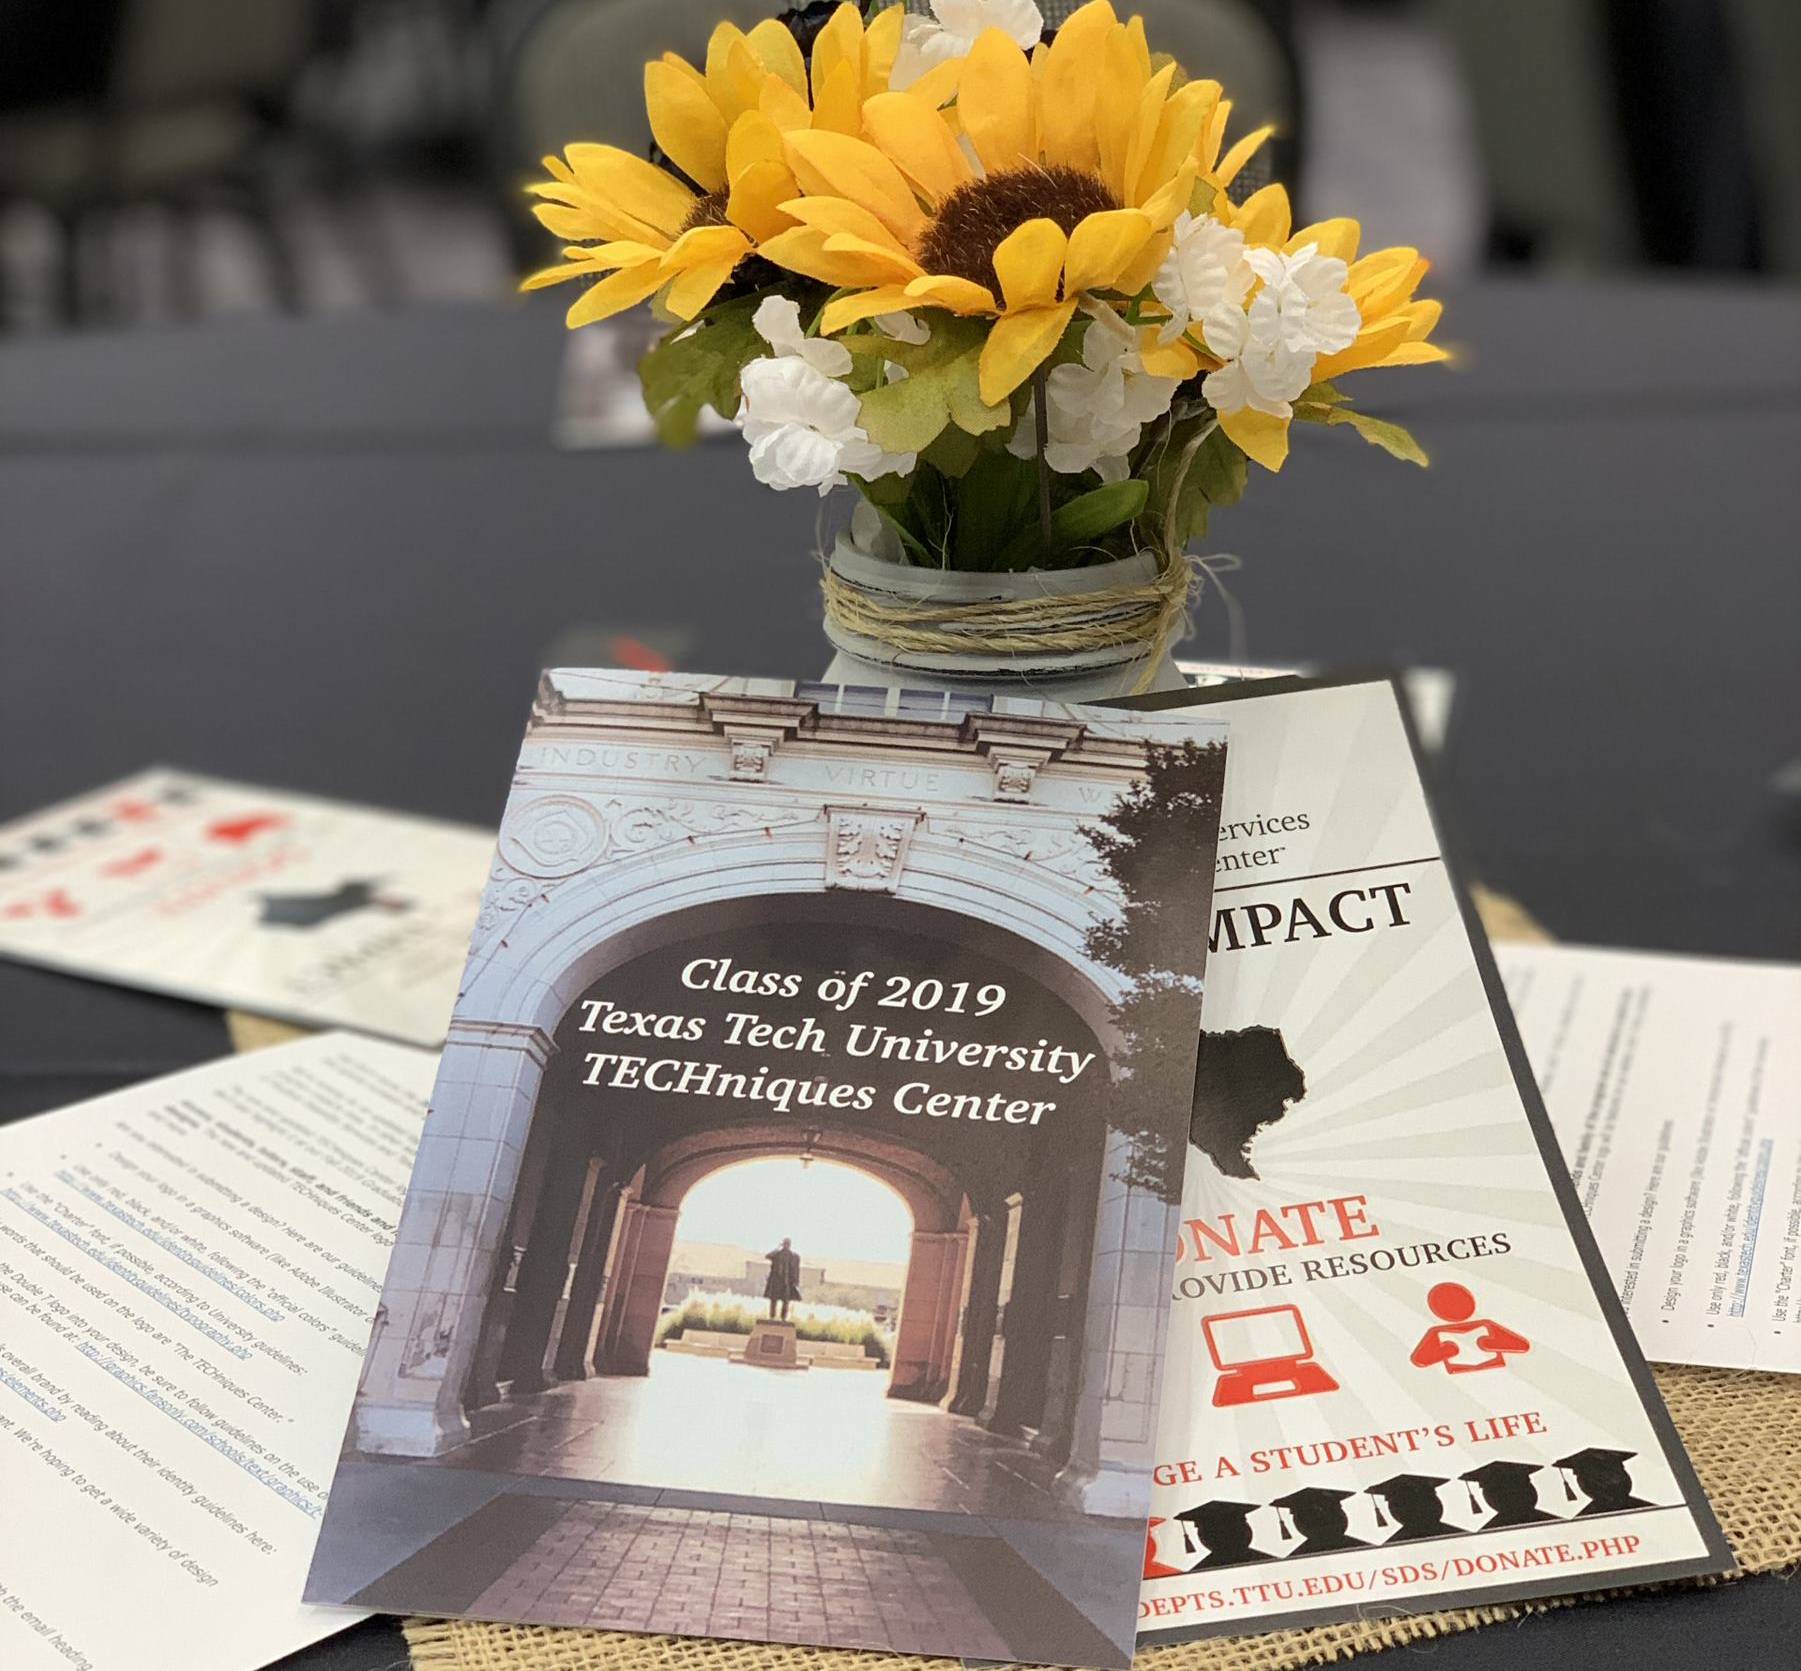 Pamphlets on a table focusing on the top one which says "Class of 2019 Texas Tech University Techniques Center" where a flower pot next to it with yellow and white flowers, all on a black table cloth. 